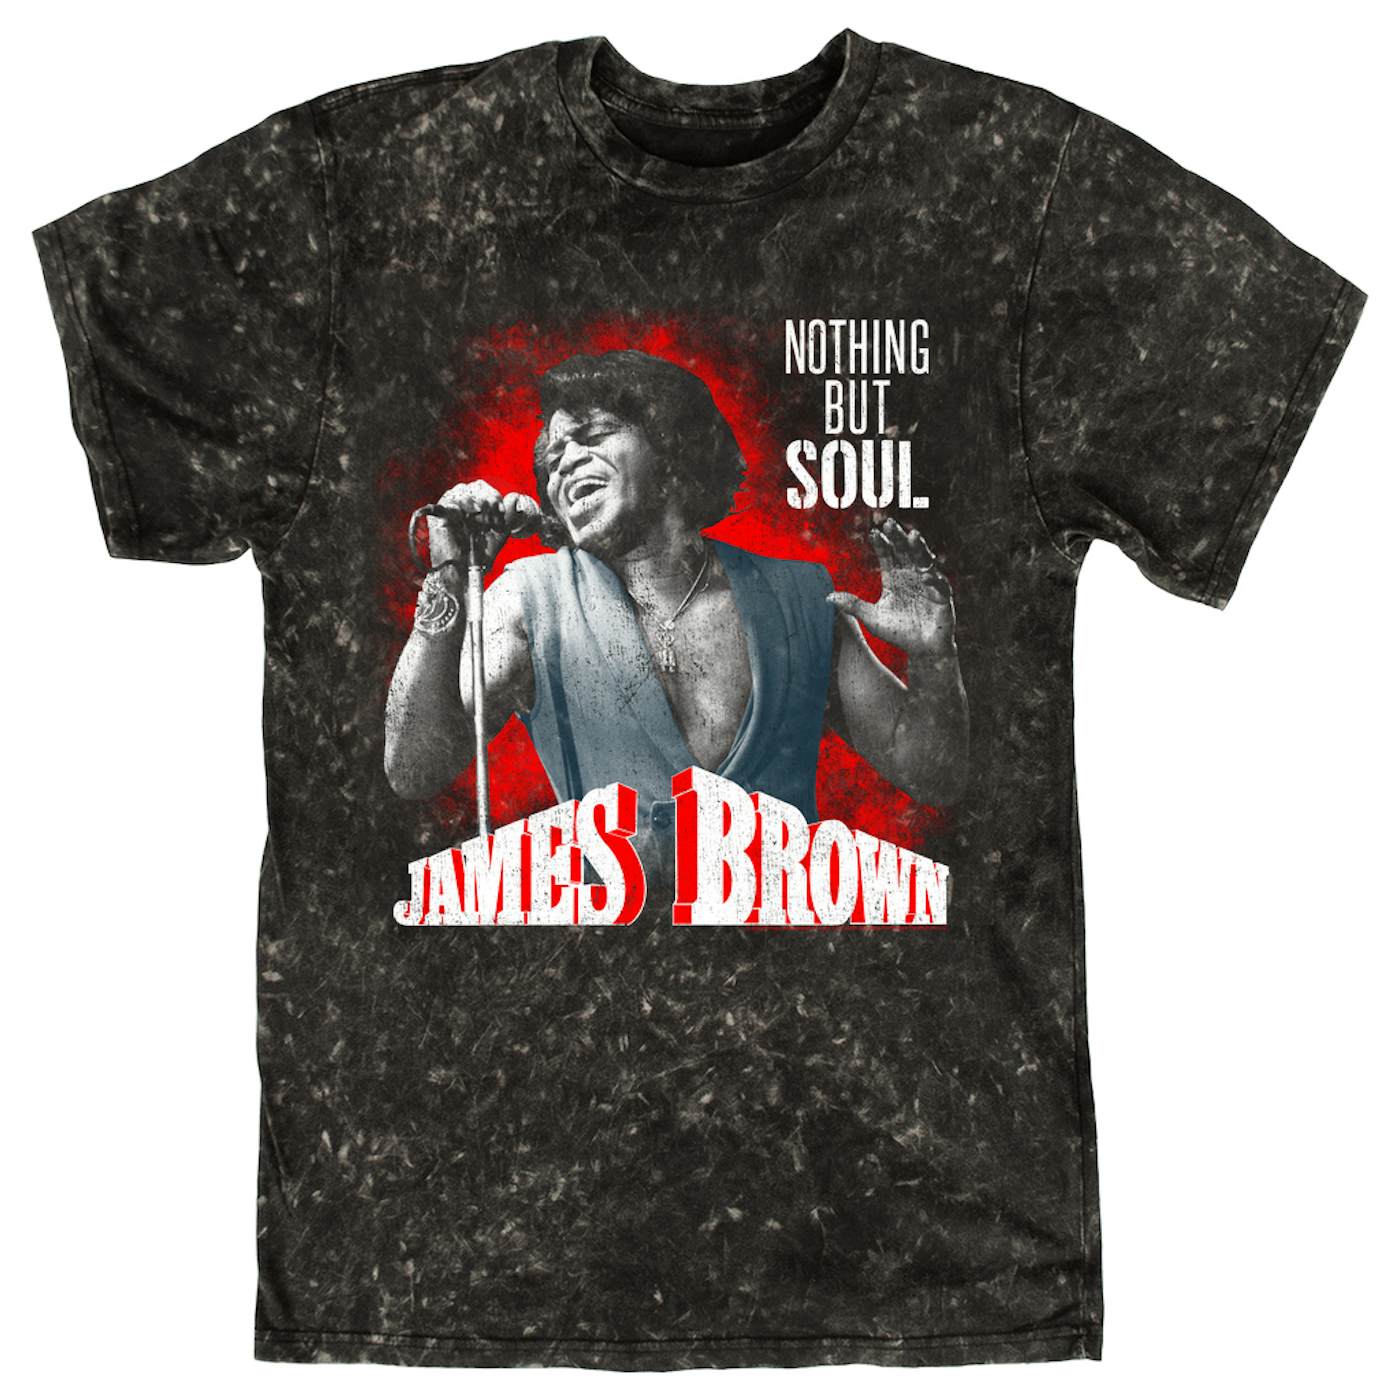 James Brown T-shirt | Nothing But Soul James Brown Mineral Wash Shirt